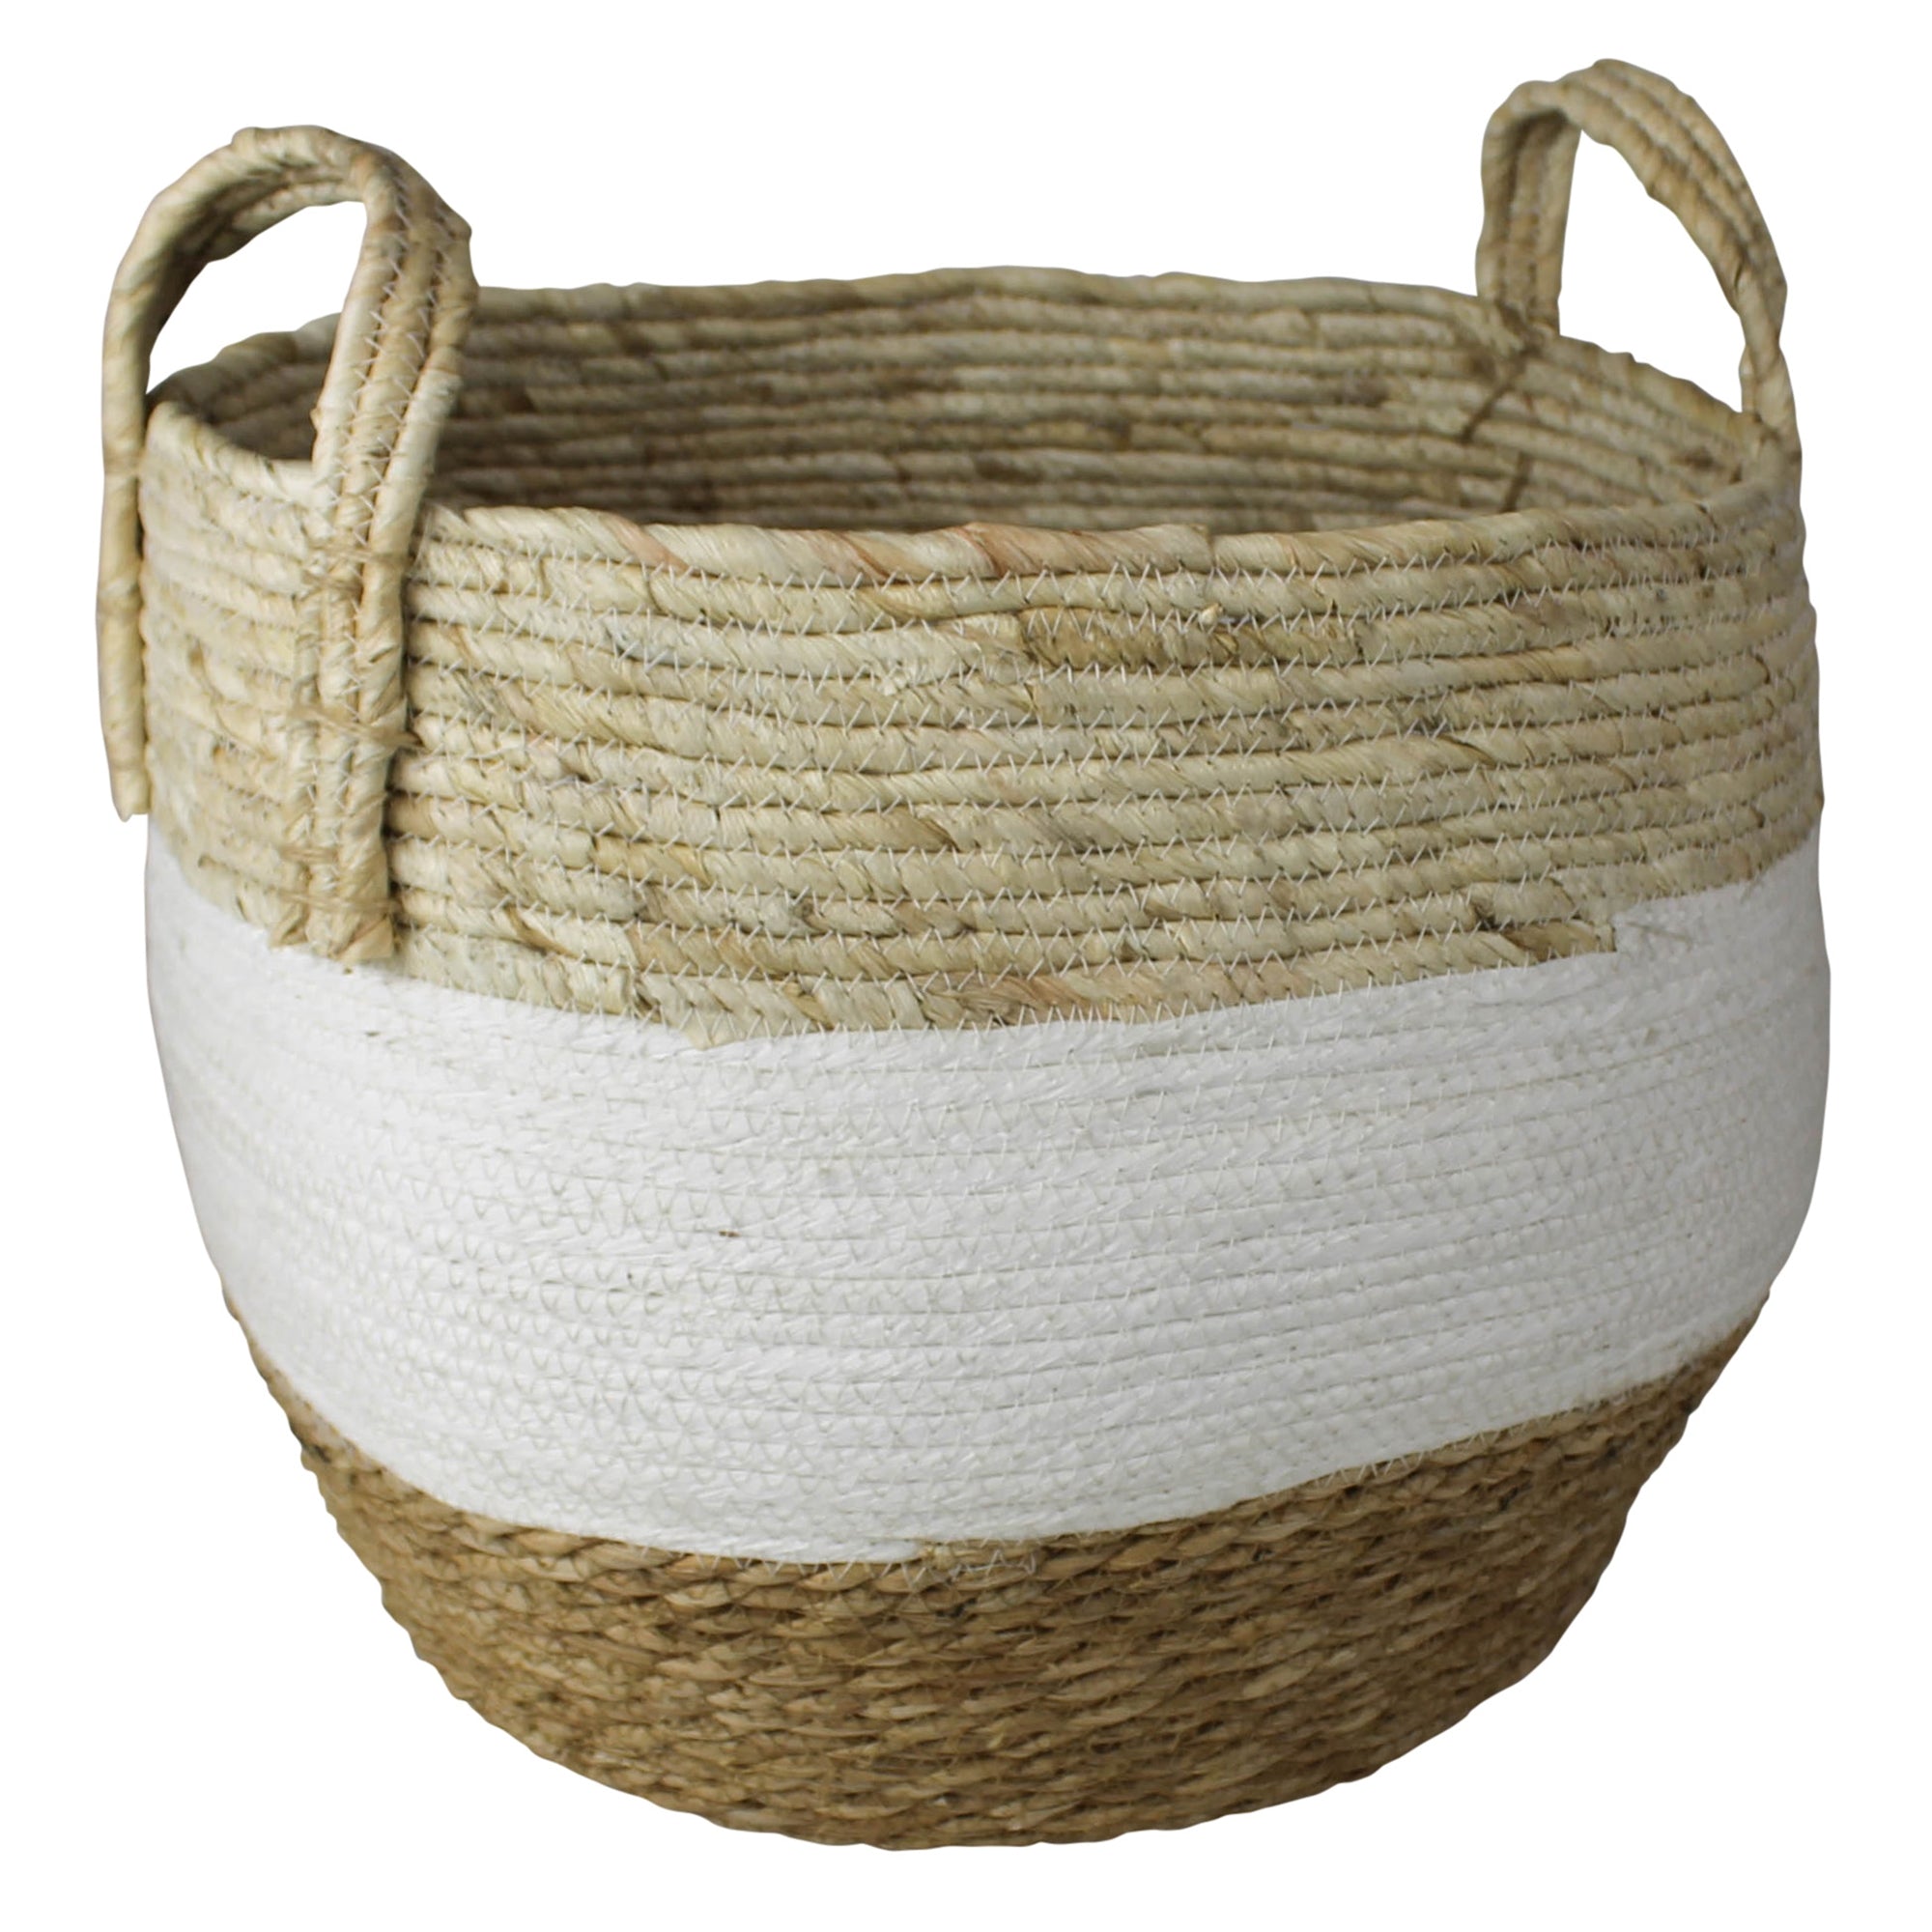 GIDEON GRASS AND COTTON BASKETS, Set of 2